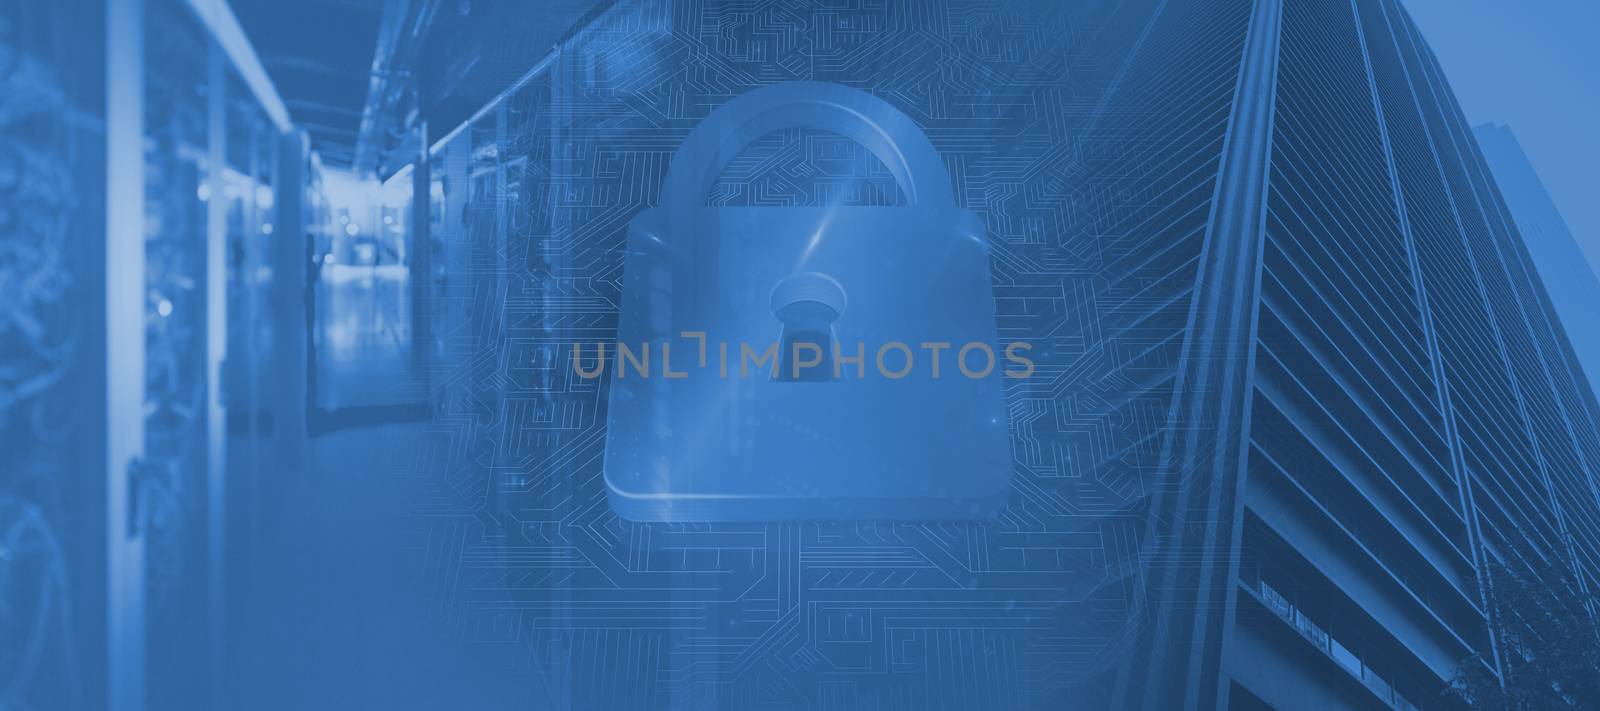 Composite image of lock on blue circuit background by Wavebreakmedia